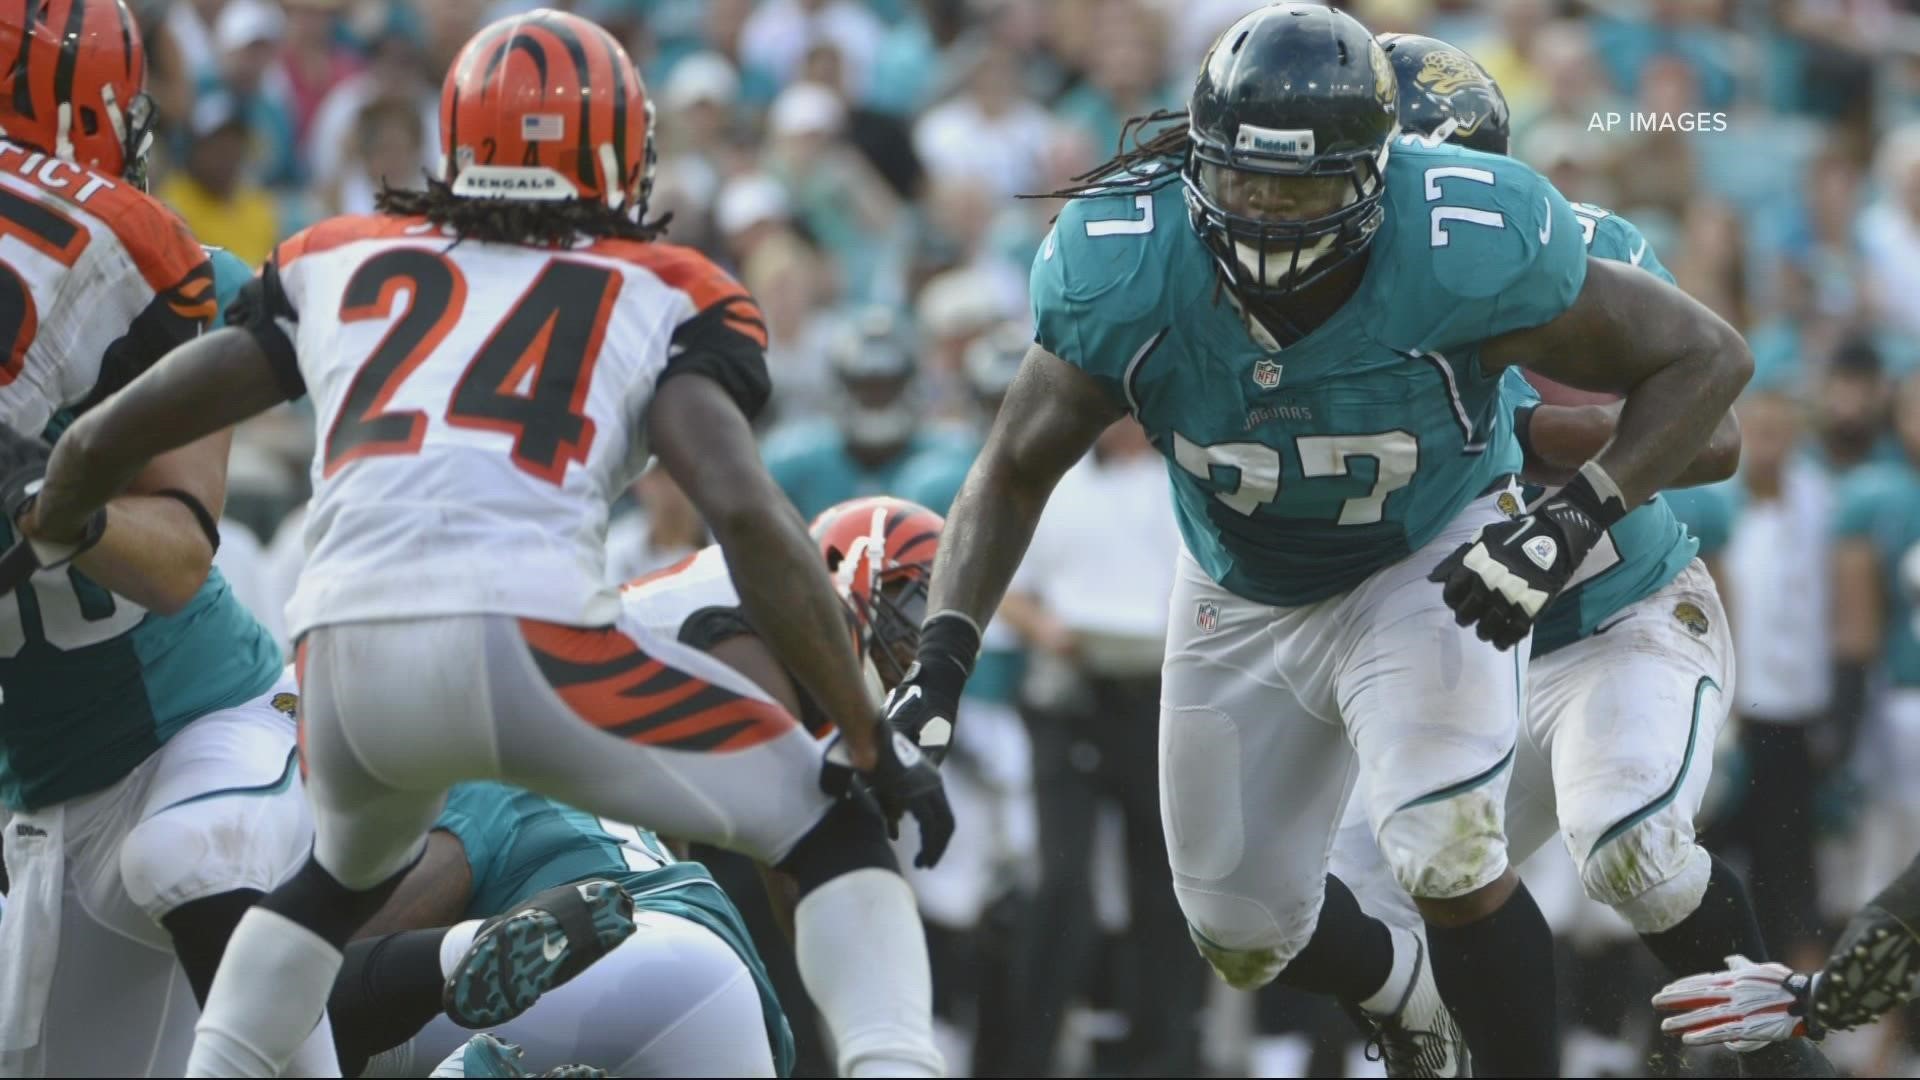 Former Jaguars guard Uche Nwaneri, who played for Jacksonville for seven seasons, died Friday, the team confirmed.